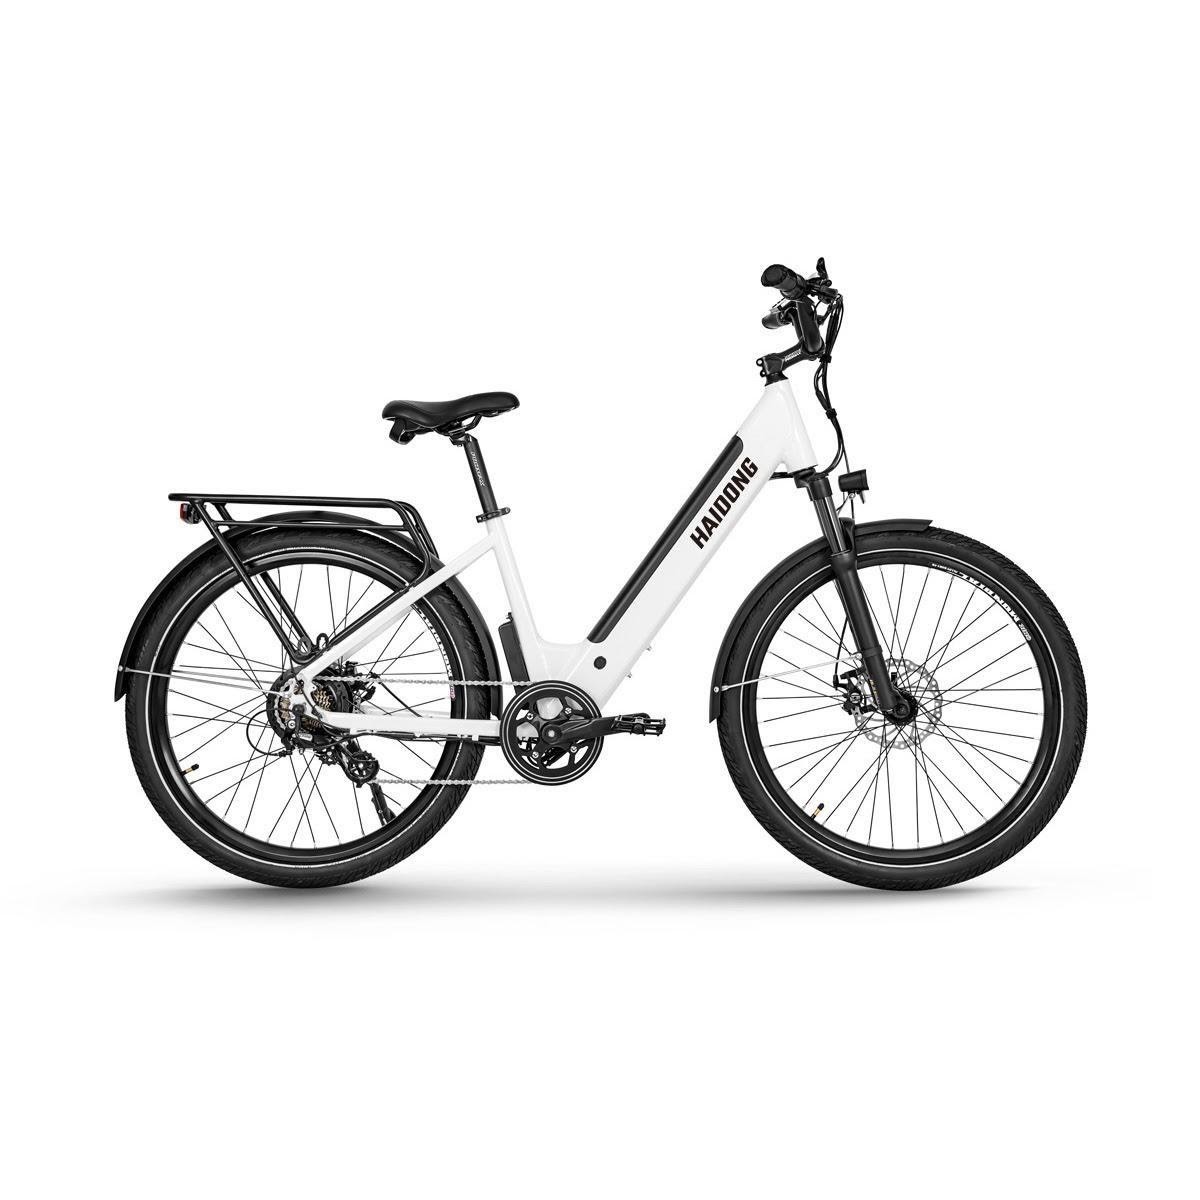 Have you already got your eBike?